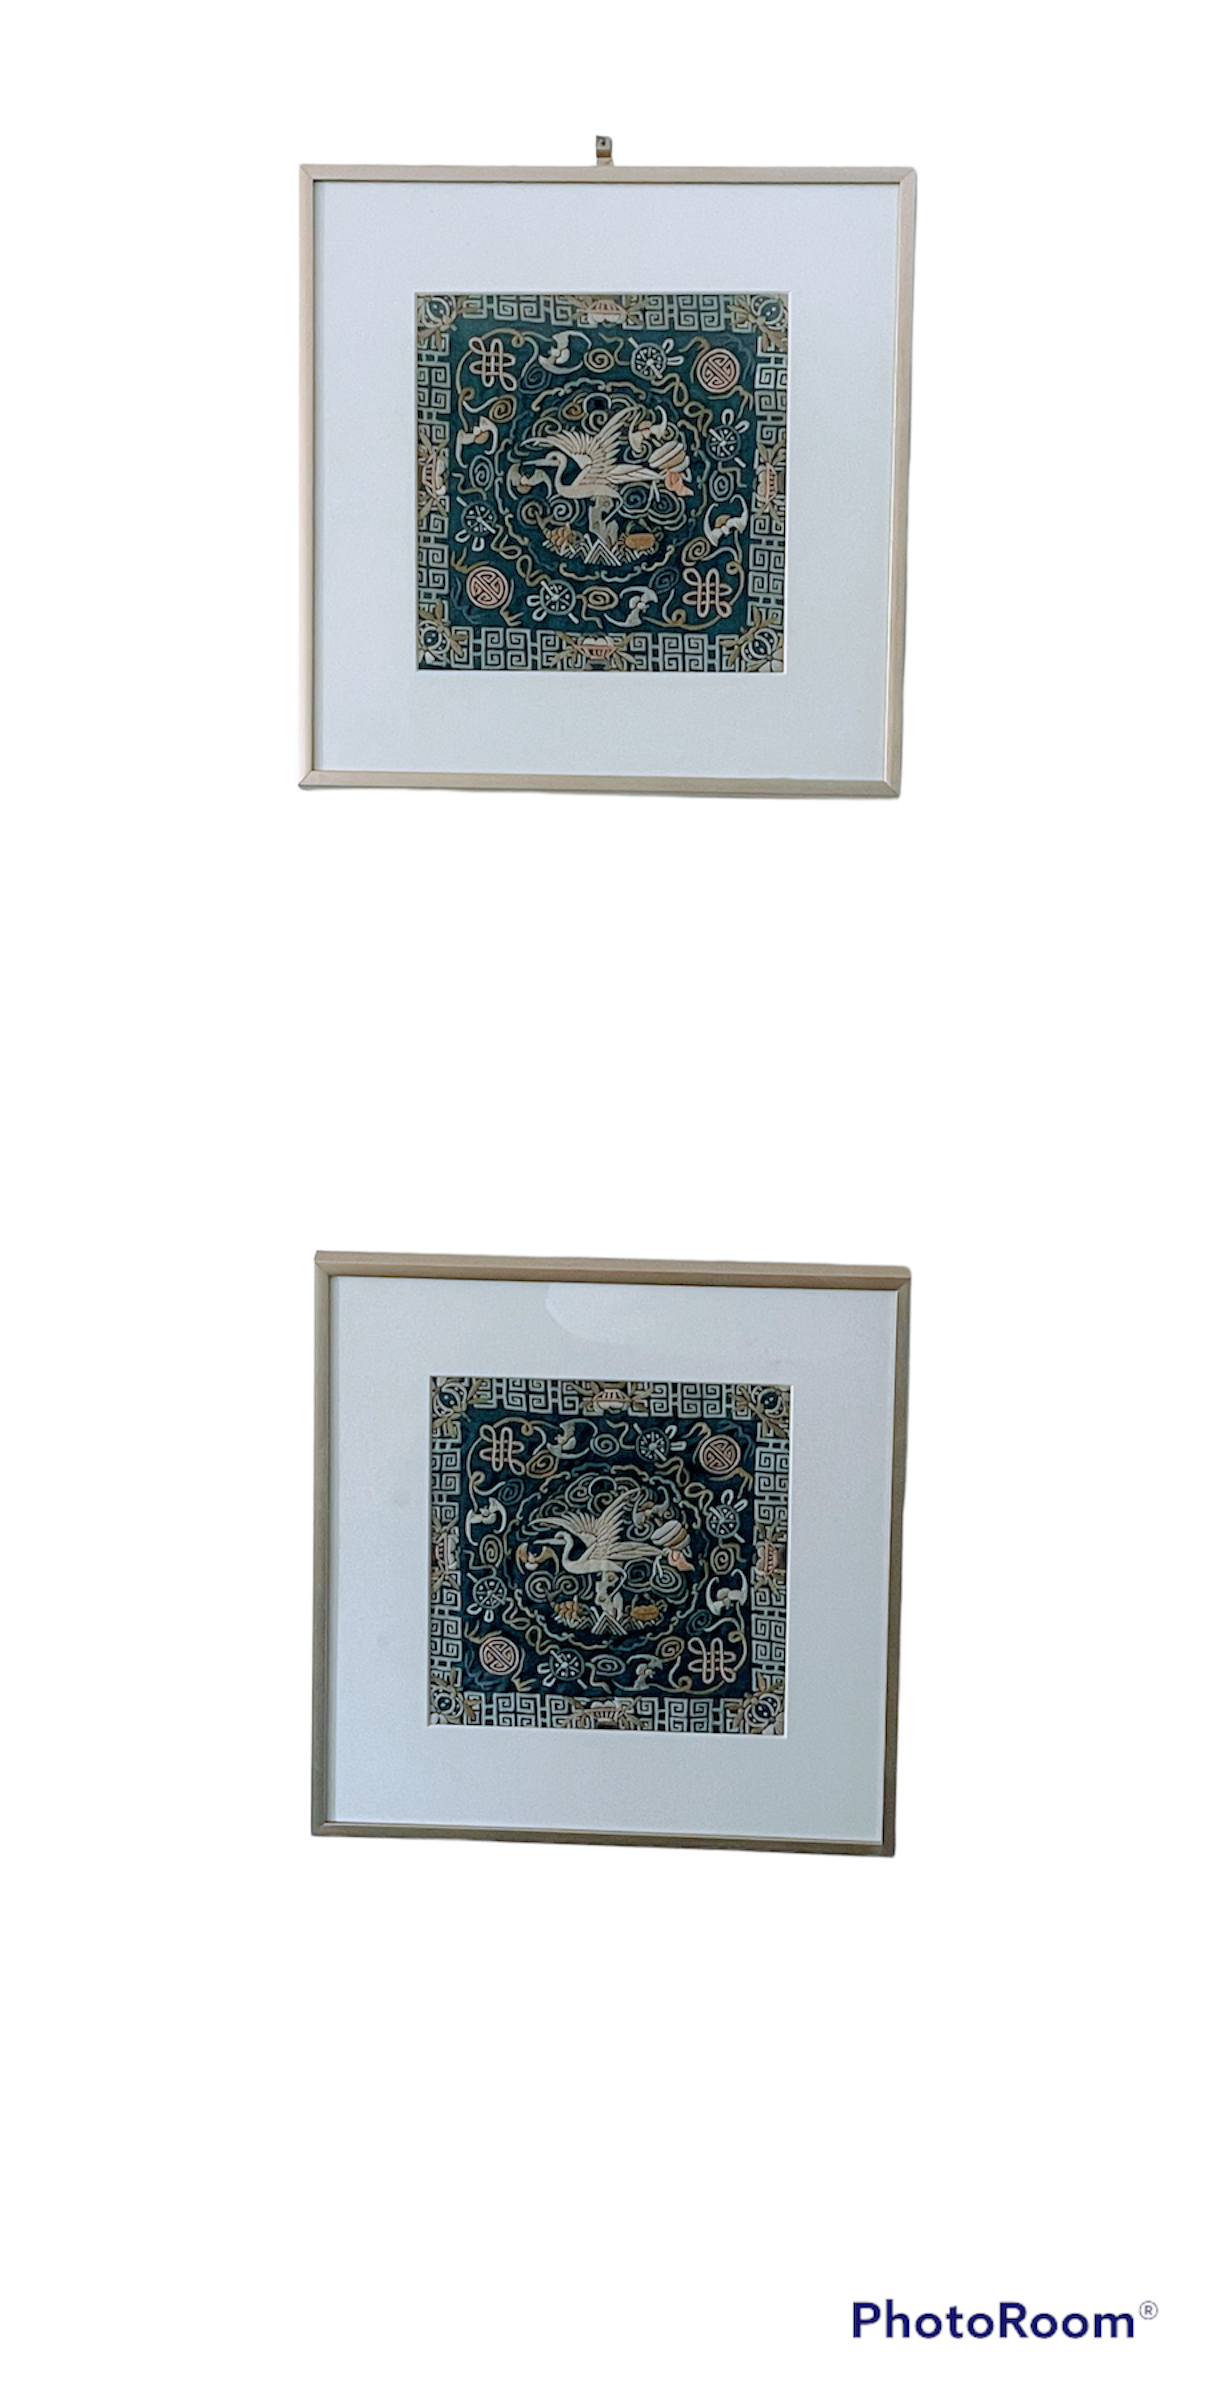 An antique framed Chinese embroidered textile fragment